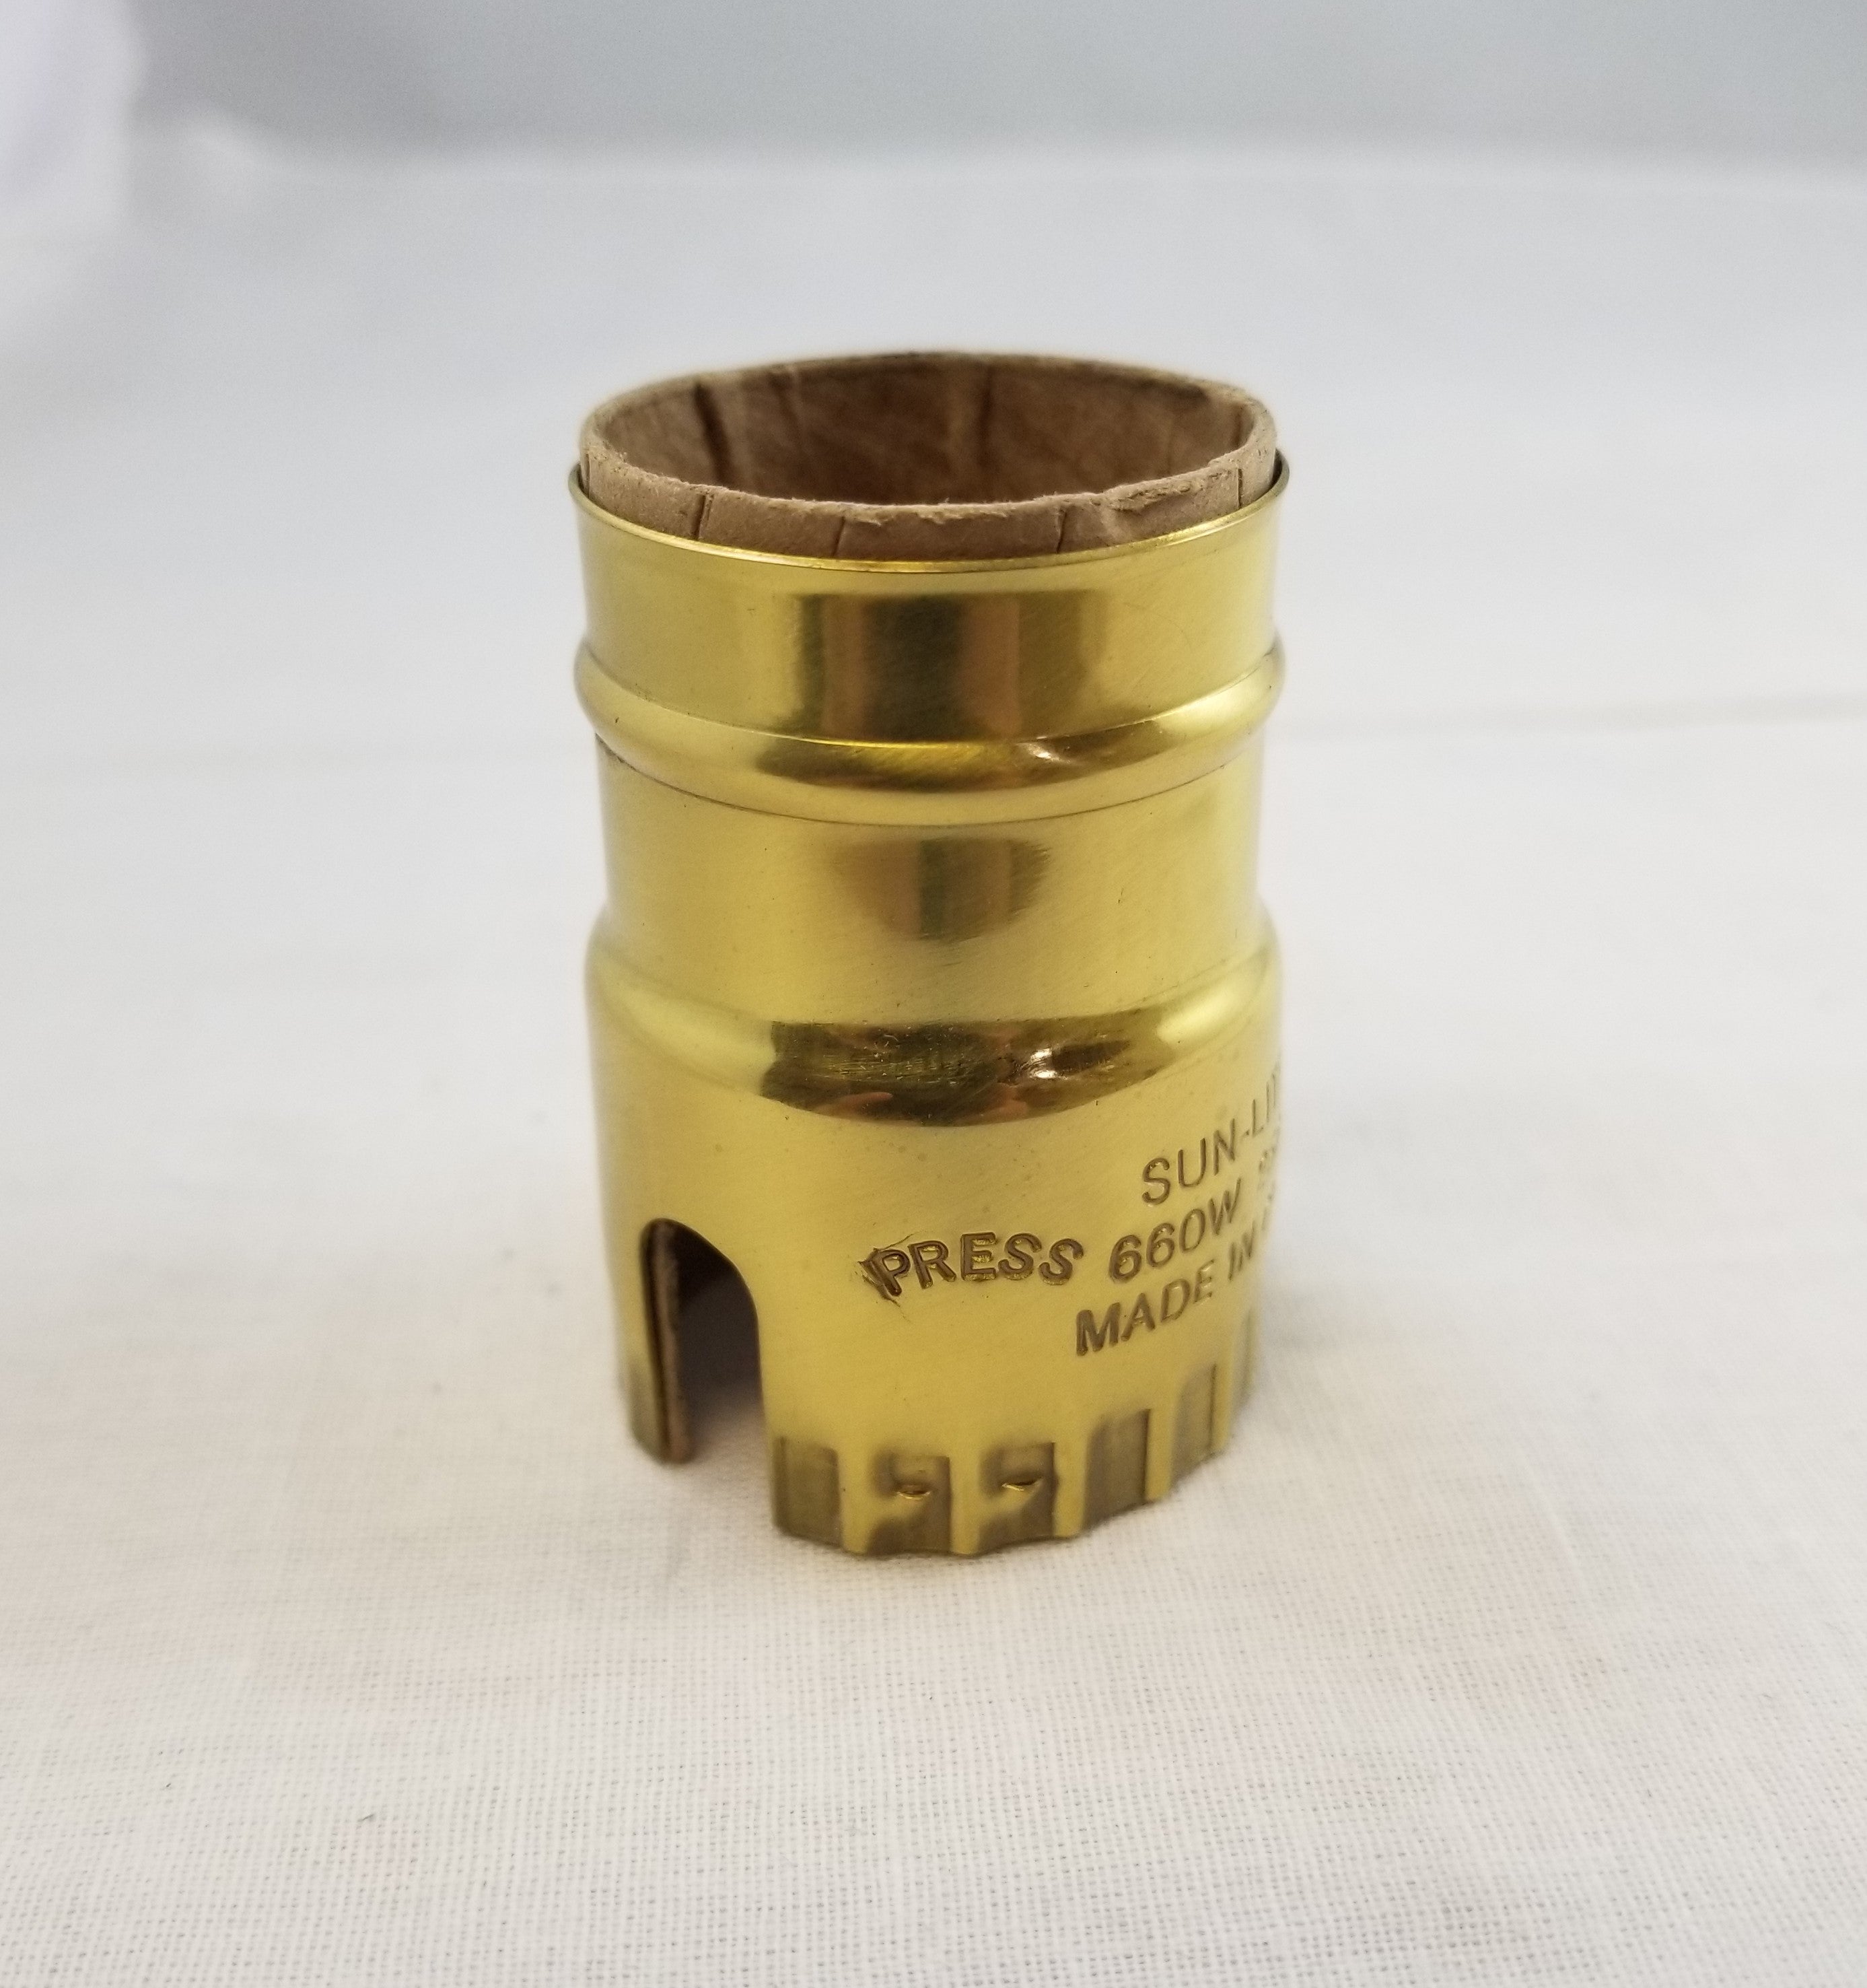 Electrolier Solid Brass Socket Shell for Key, Pull Chain, or Turn Knob